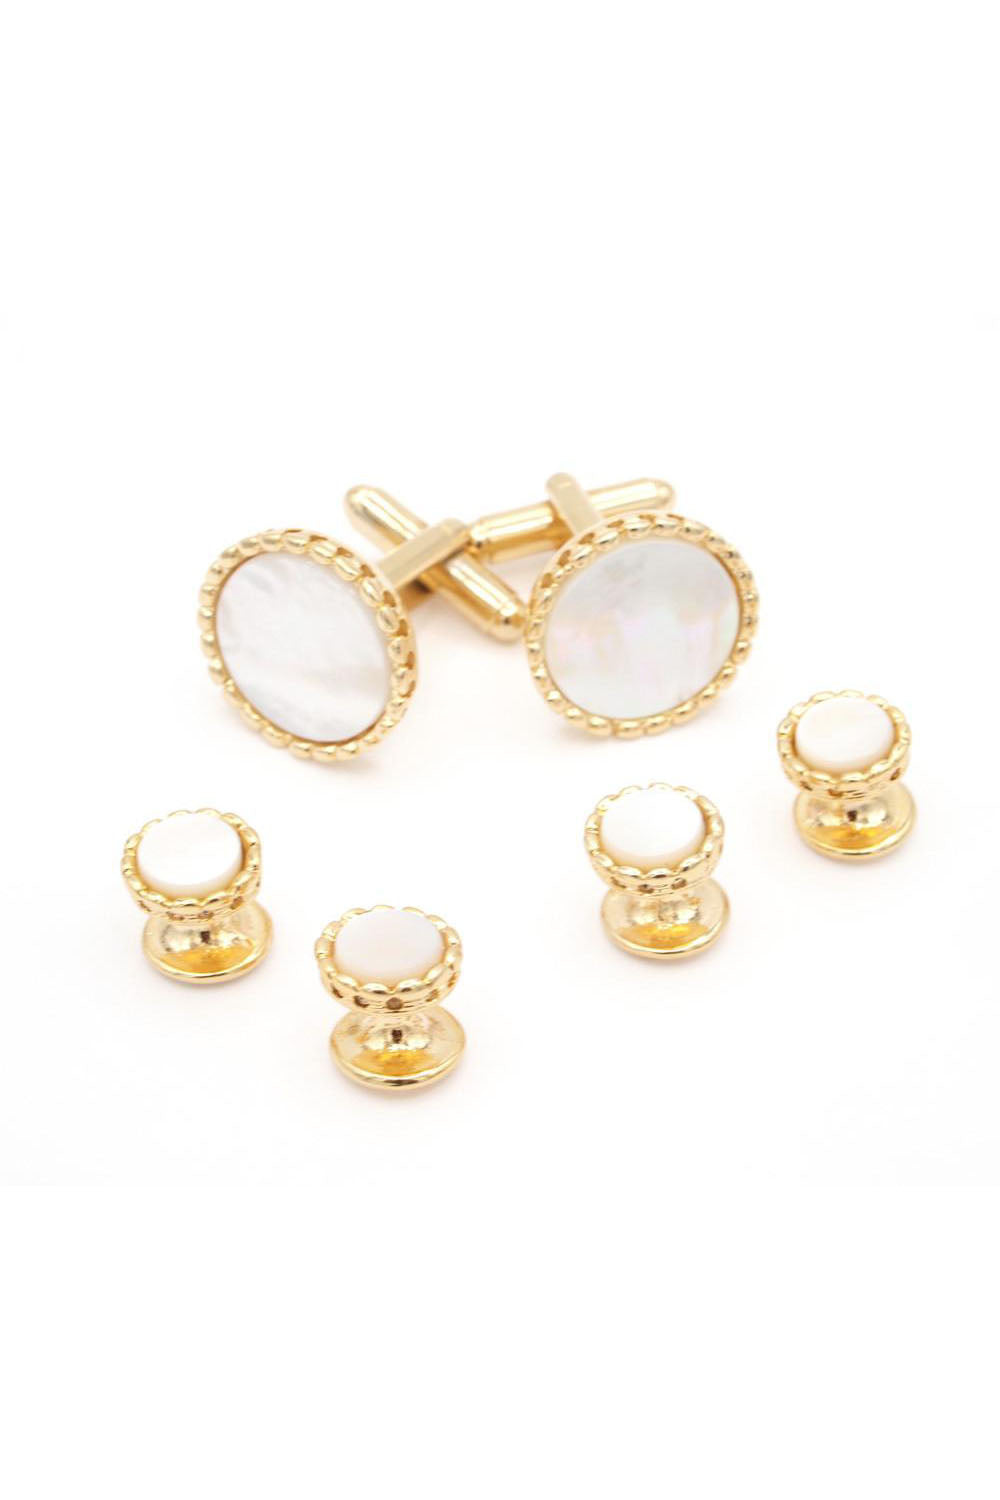 JJ Weston Gold Bead Mother of Pearl Studs and Cufflinks Set